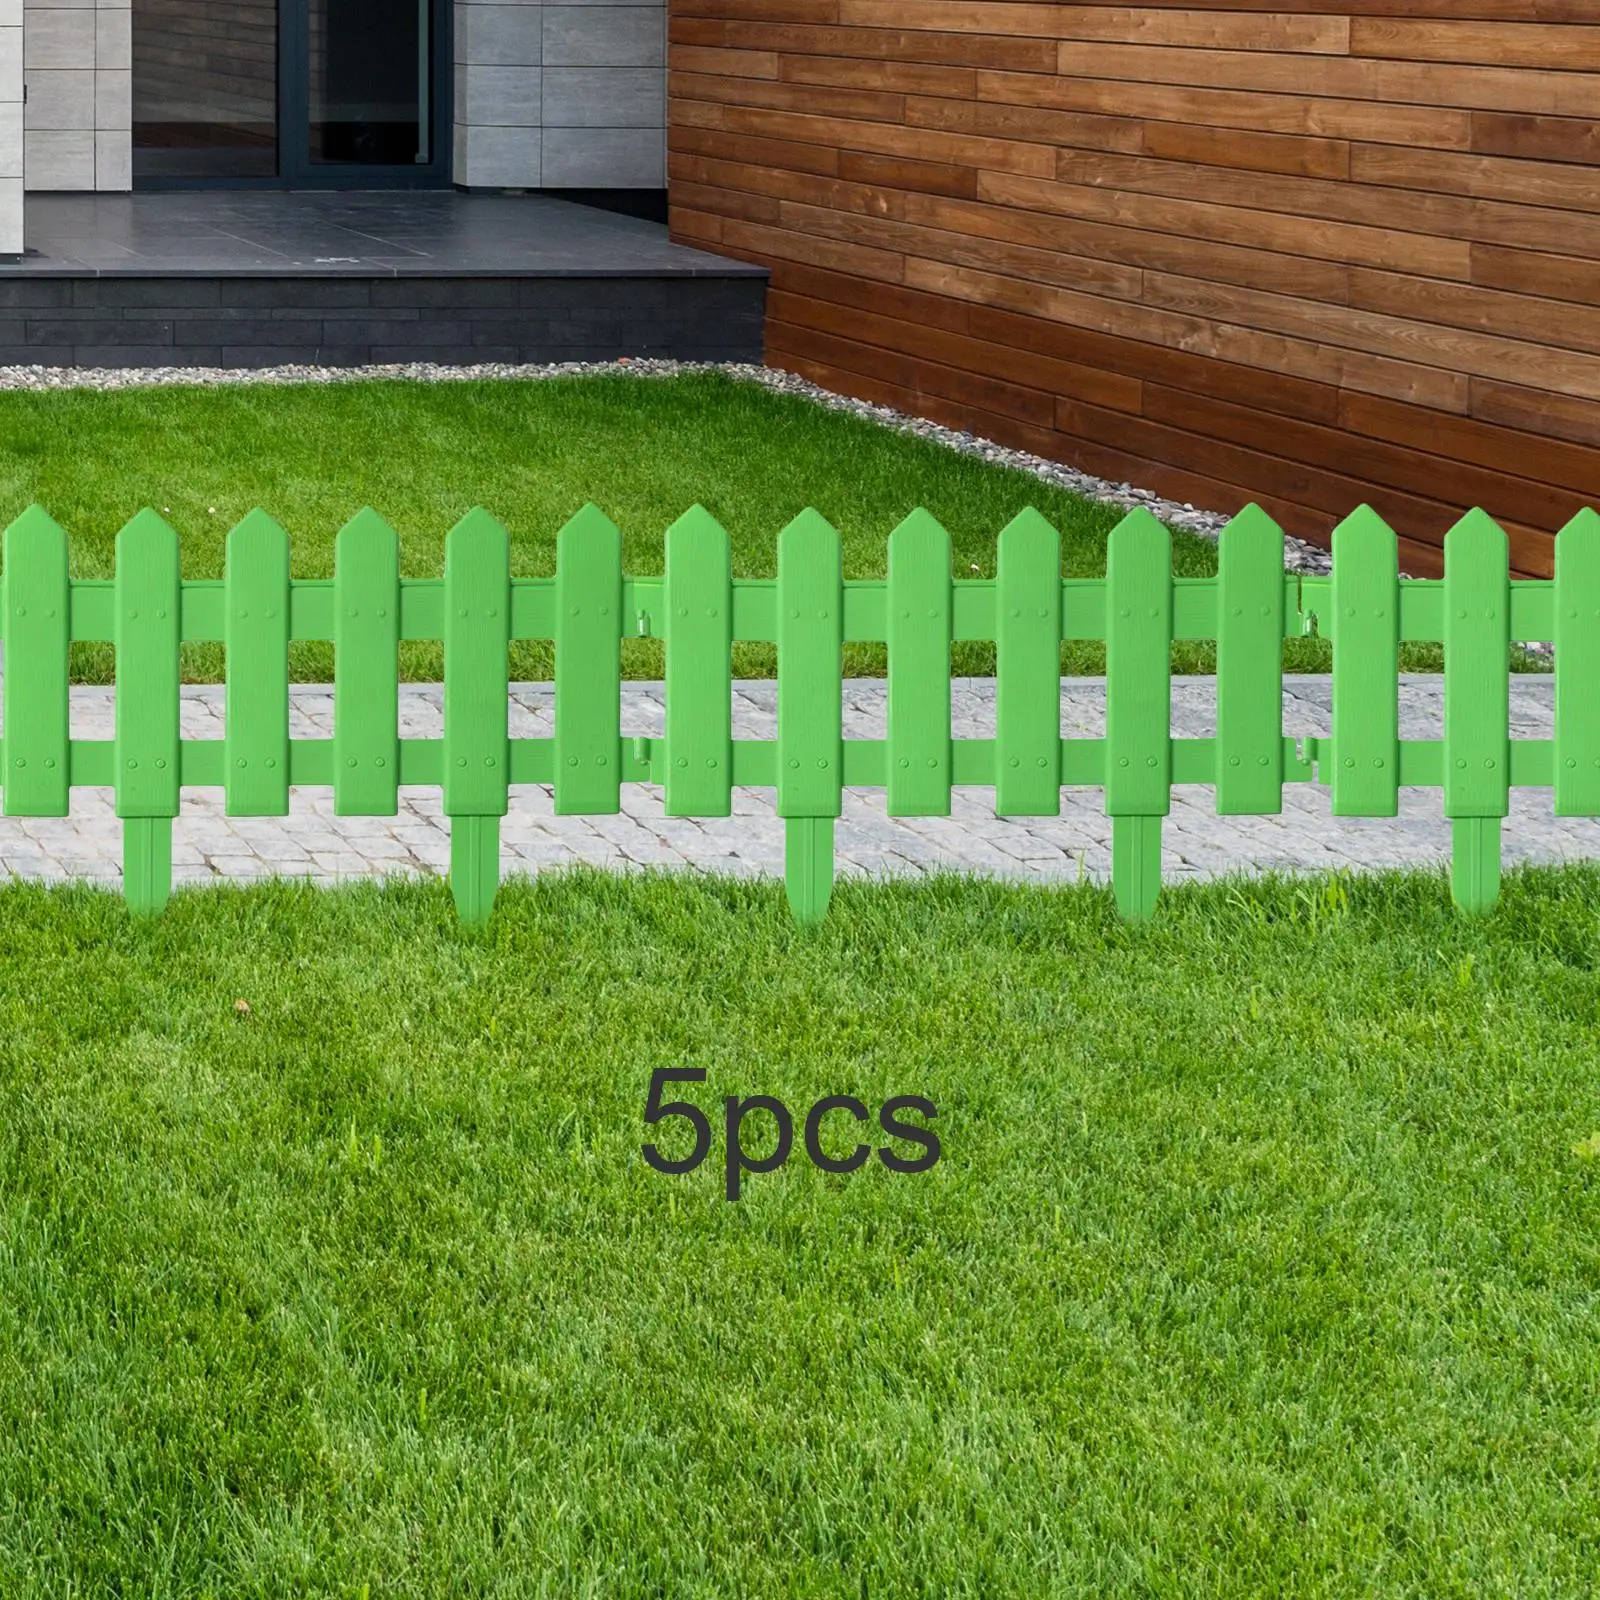 Animal Barrier Fence Multipurpose Landscape Edging for Yard Driveway Patio